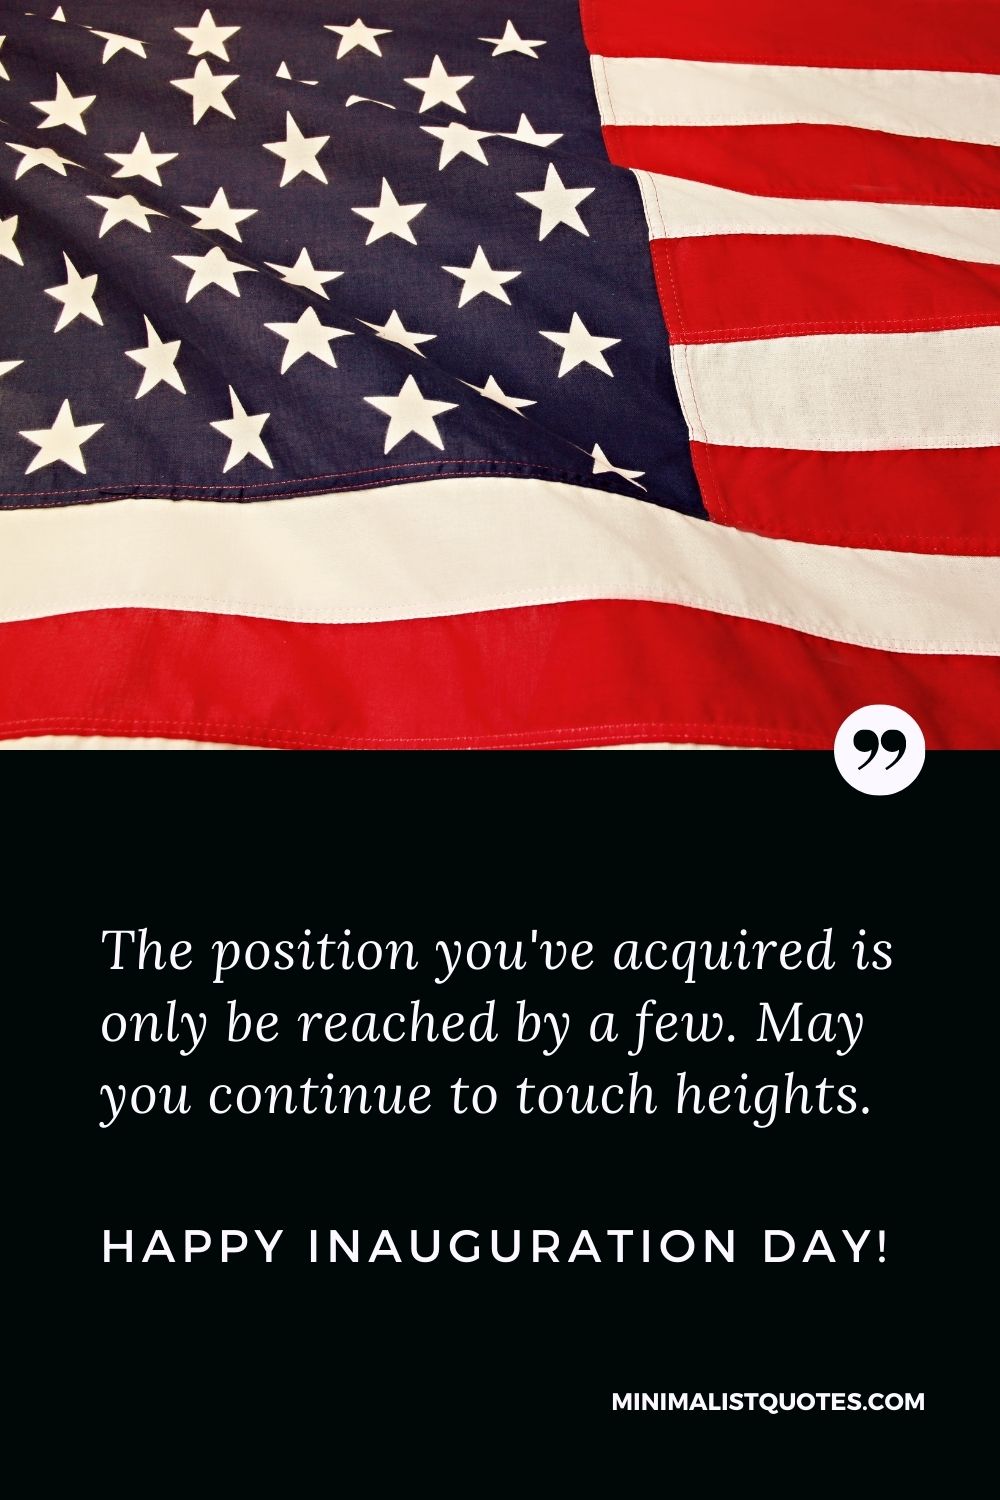 Inauguration Day Quote, Wish & Message With Image: The position you've acquired is only be reached by a few. May you continue to touch heights. Happy Inauguration Day!